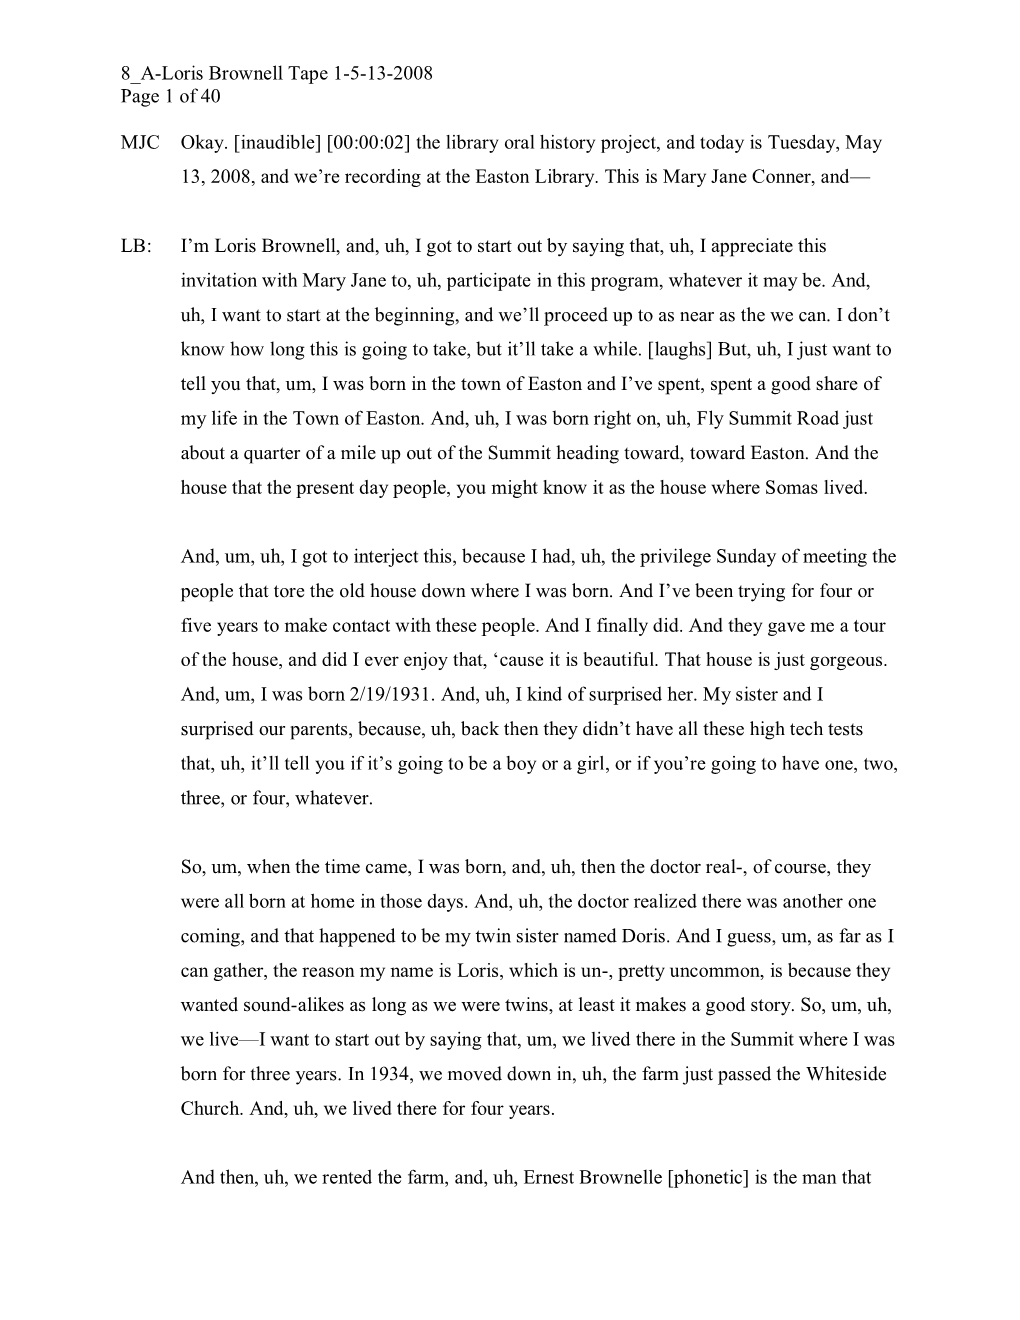 8 A-Loris Brownell Tape 1-5-13-2008 Page 1 of 40